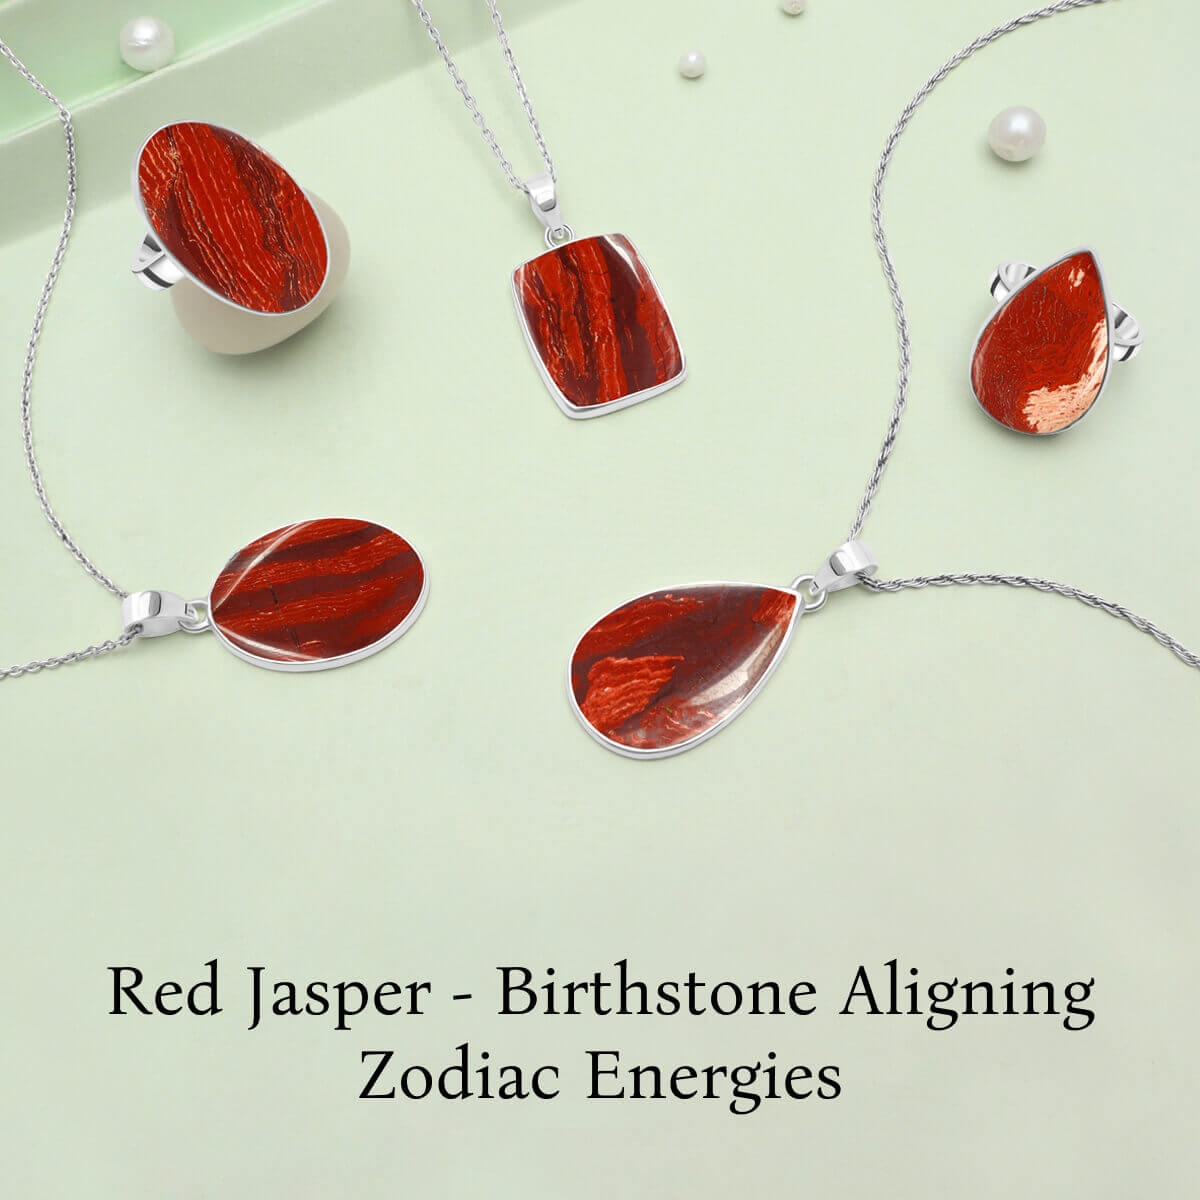 Red Jasper is The Birthstone of Which Zodiac Sign